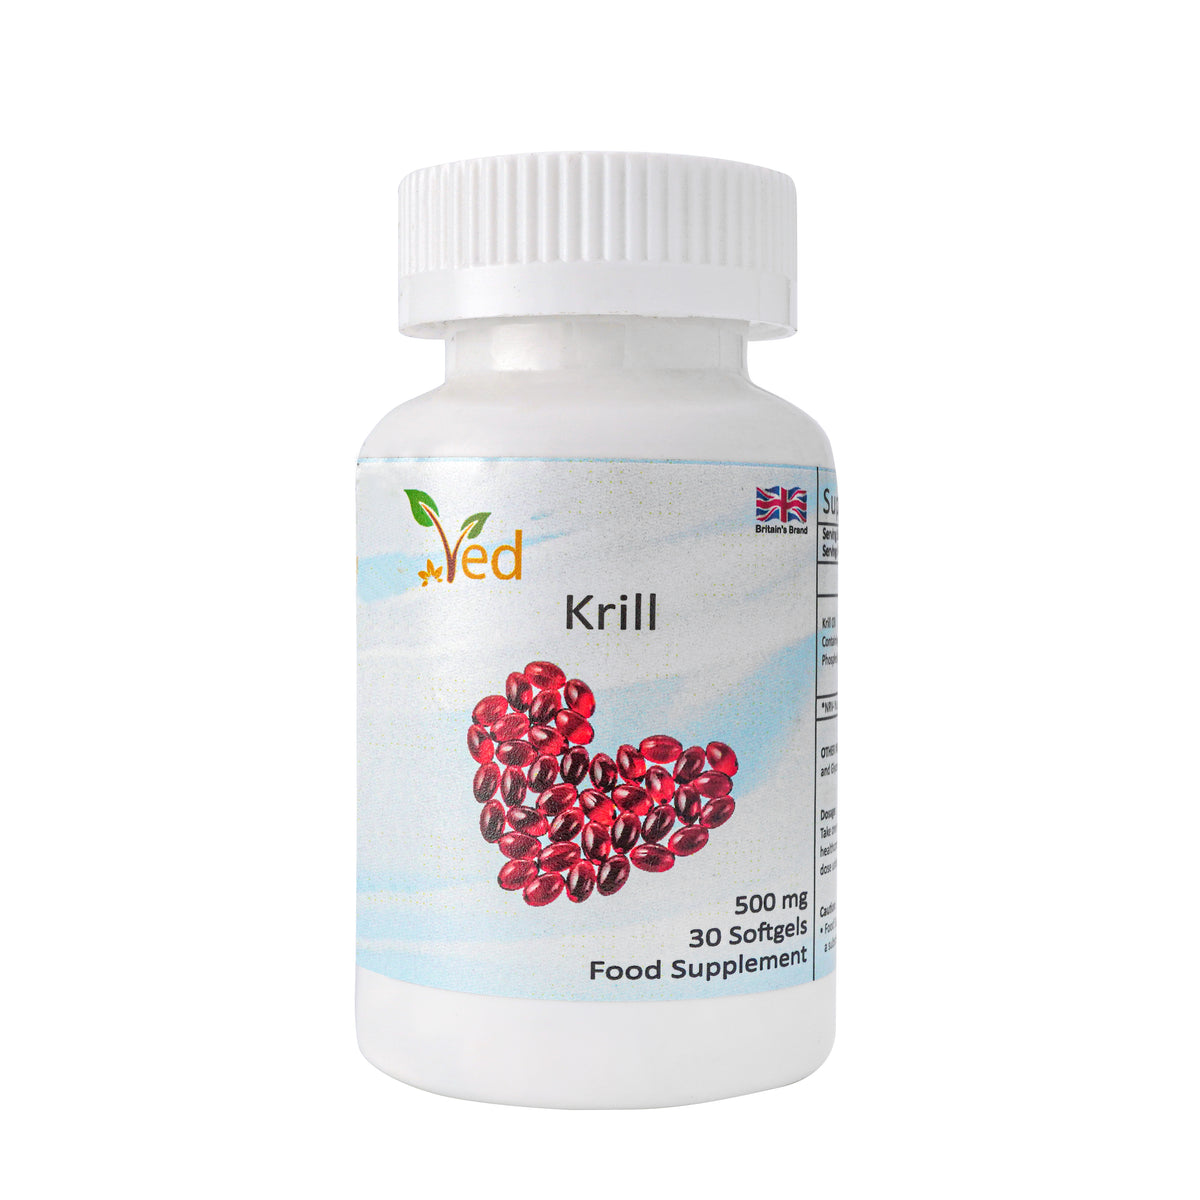 Ved Krill Oil Capsules High Strength 500mg 30 Krill Oil Softgels - Omega 3 Fatty Acids Supplements, Superb Omega/Joint, Heart & Brain Supplement,(30 Days Supply)